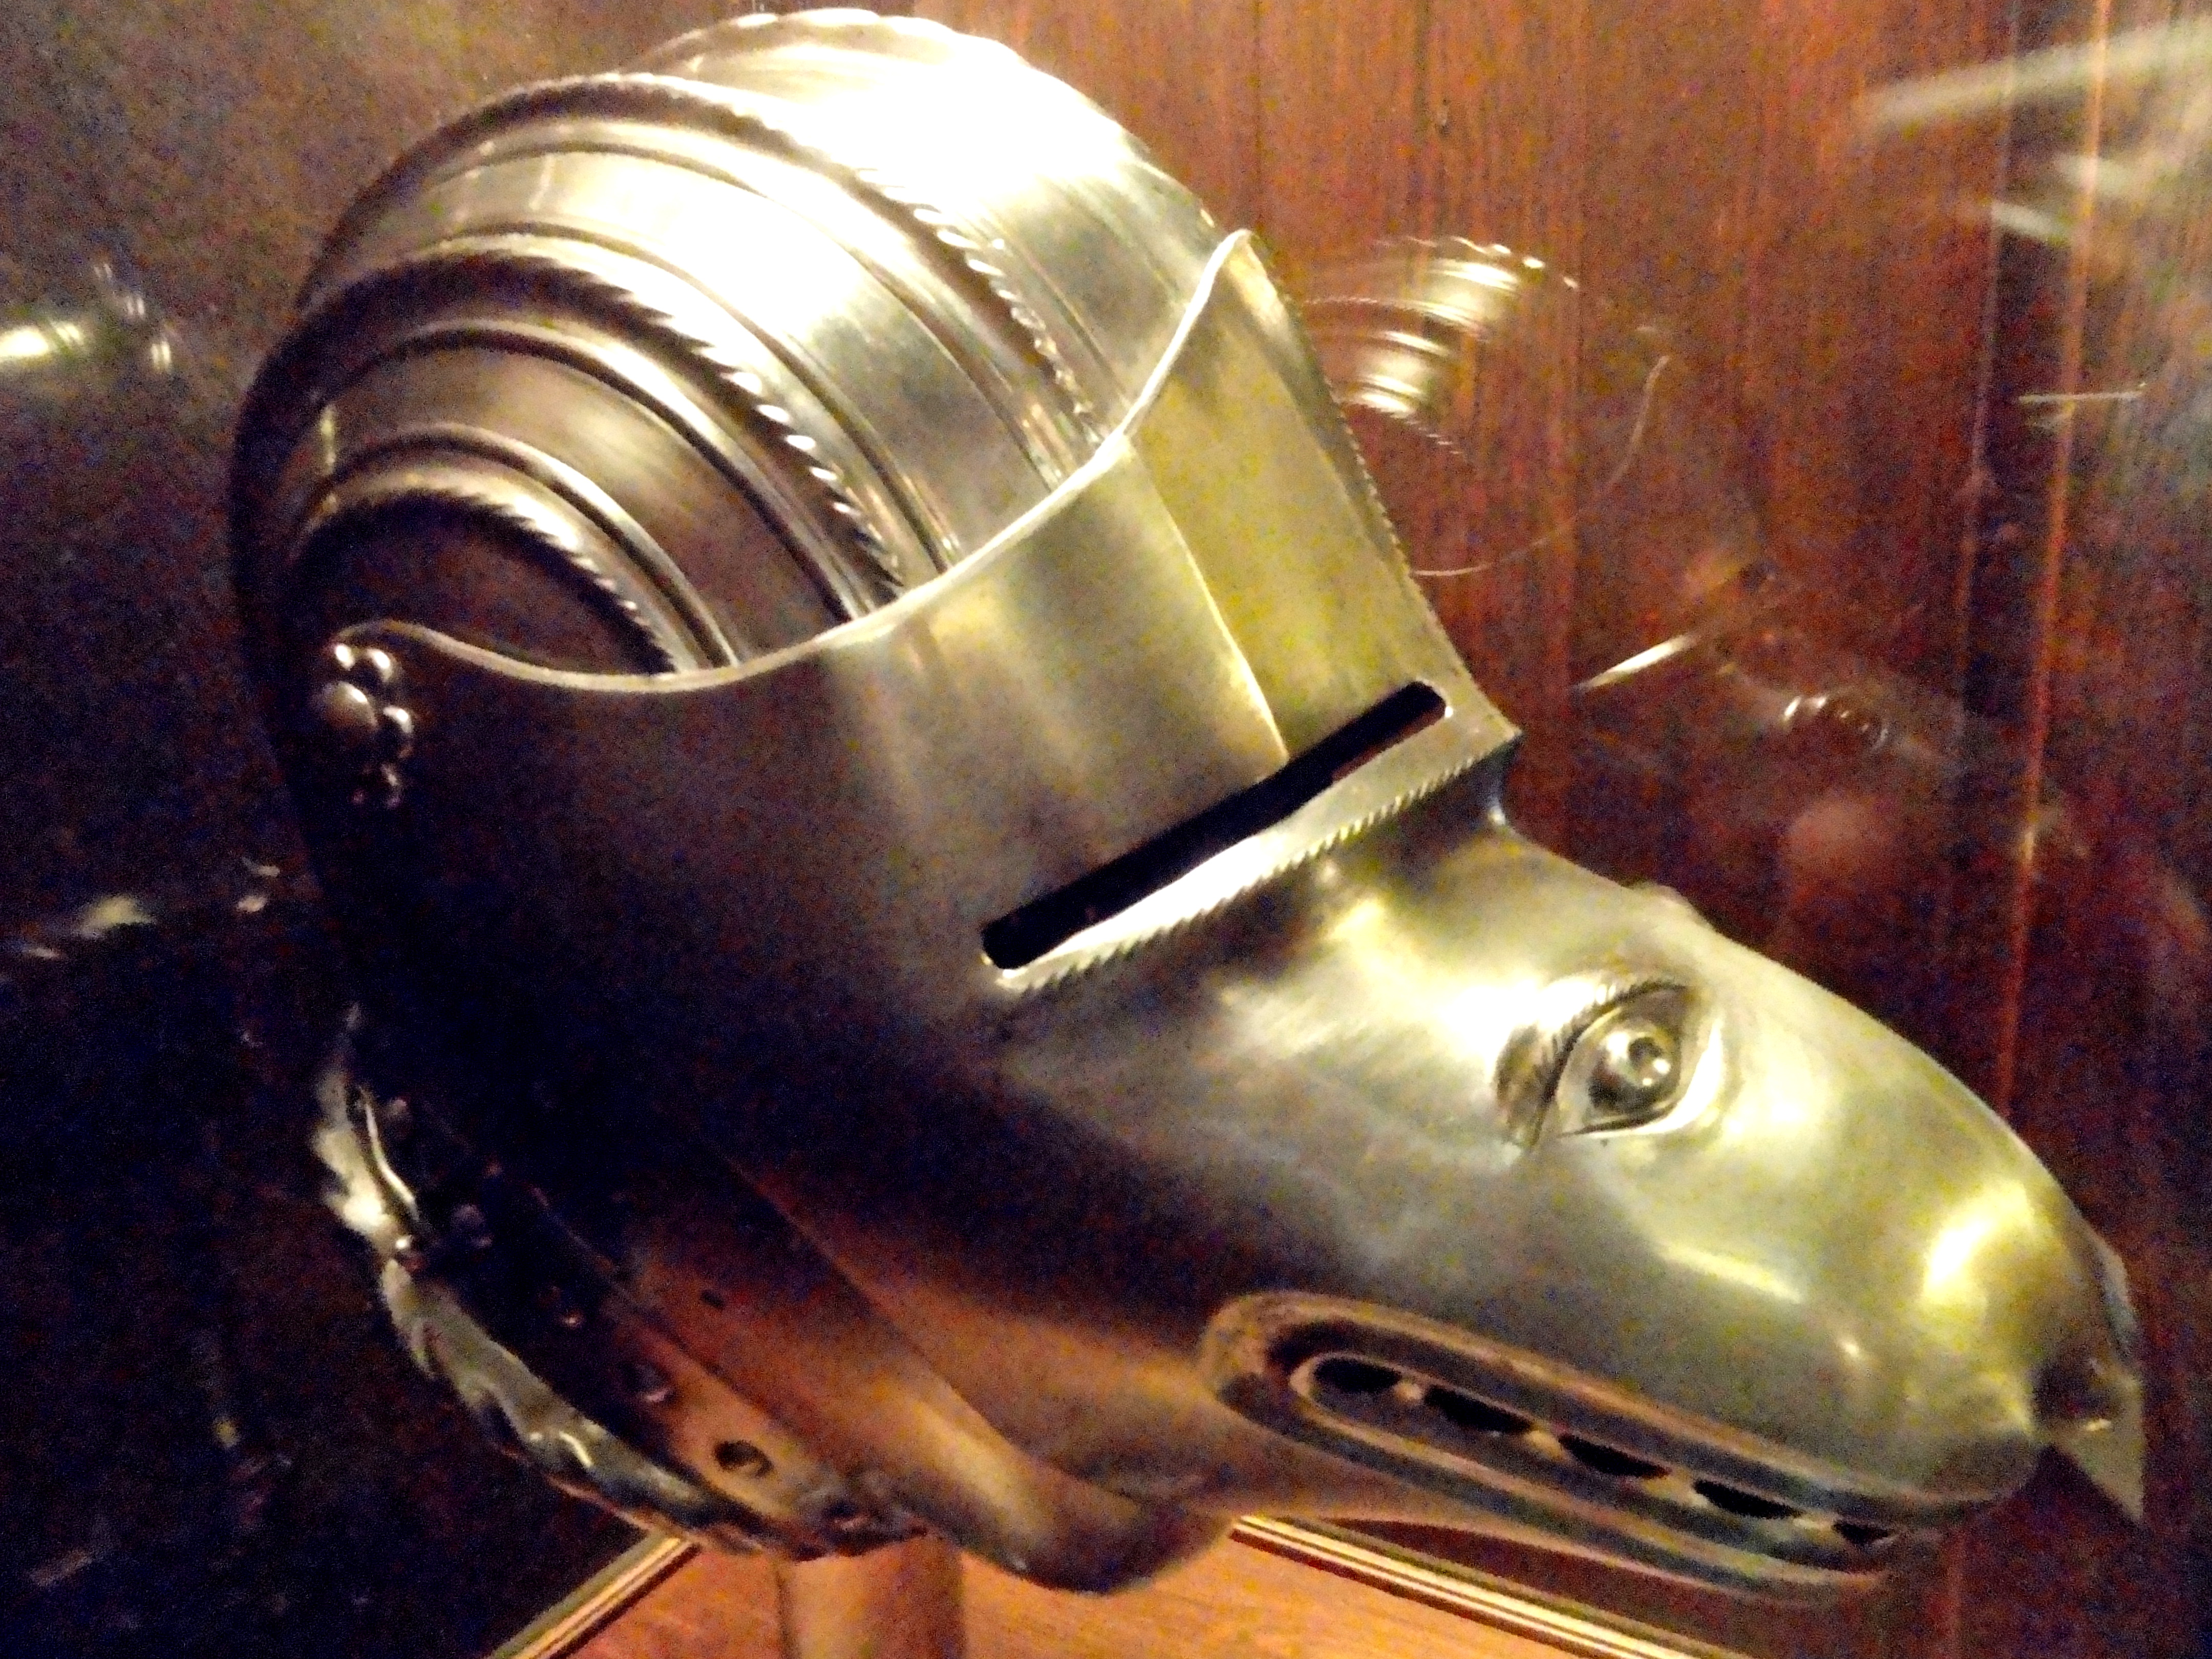 http://upload.wikimedia.org/wikipedia/commons/7/78/Close_helmet_with_wolf-face_visor,_20th_century_reproduction_-_Higgins_Armory_Museum_-_DSC05436.JPG